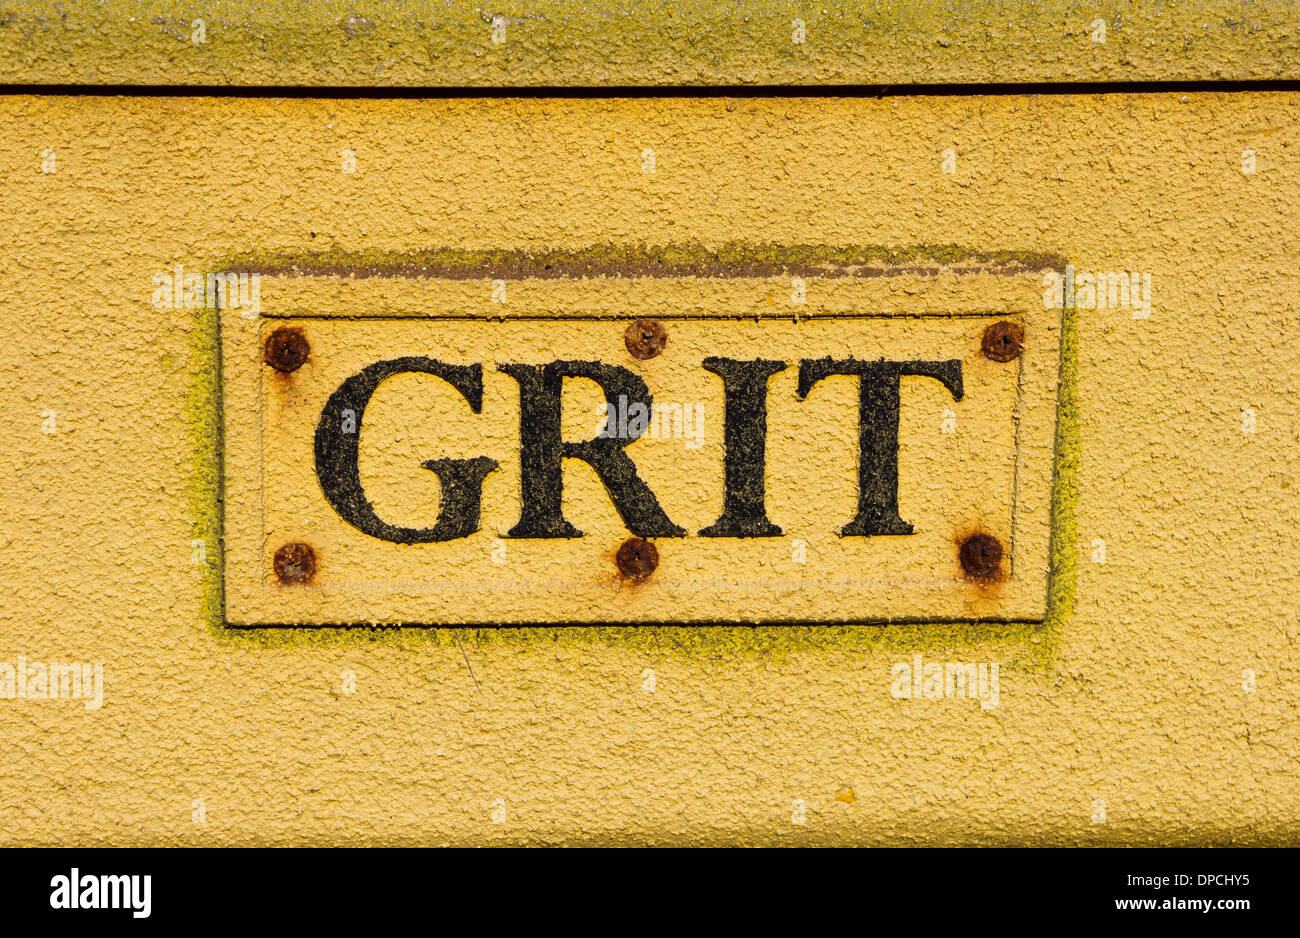 Extreme closeup to a Grit Bin Stock Photo